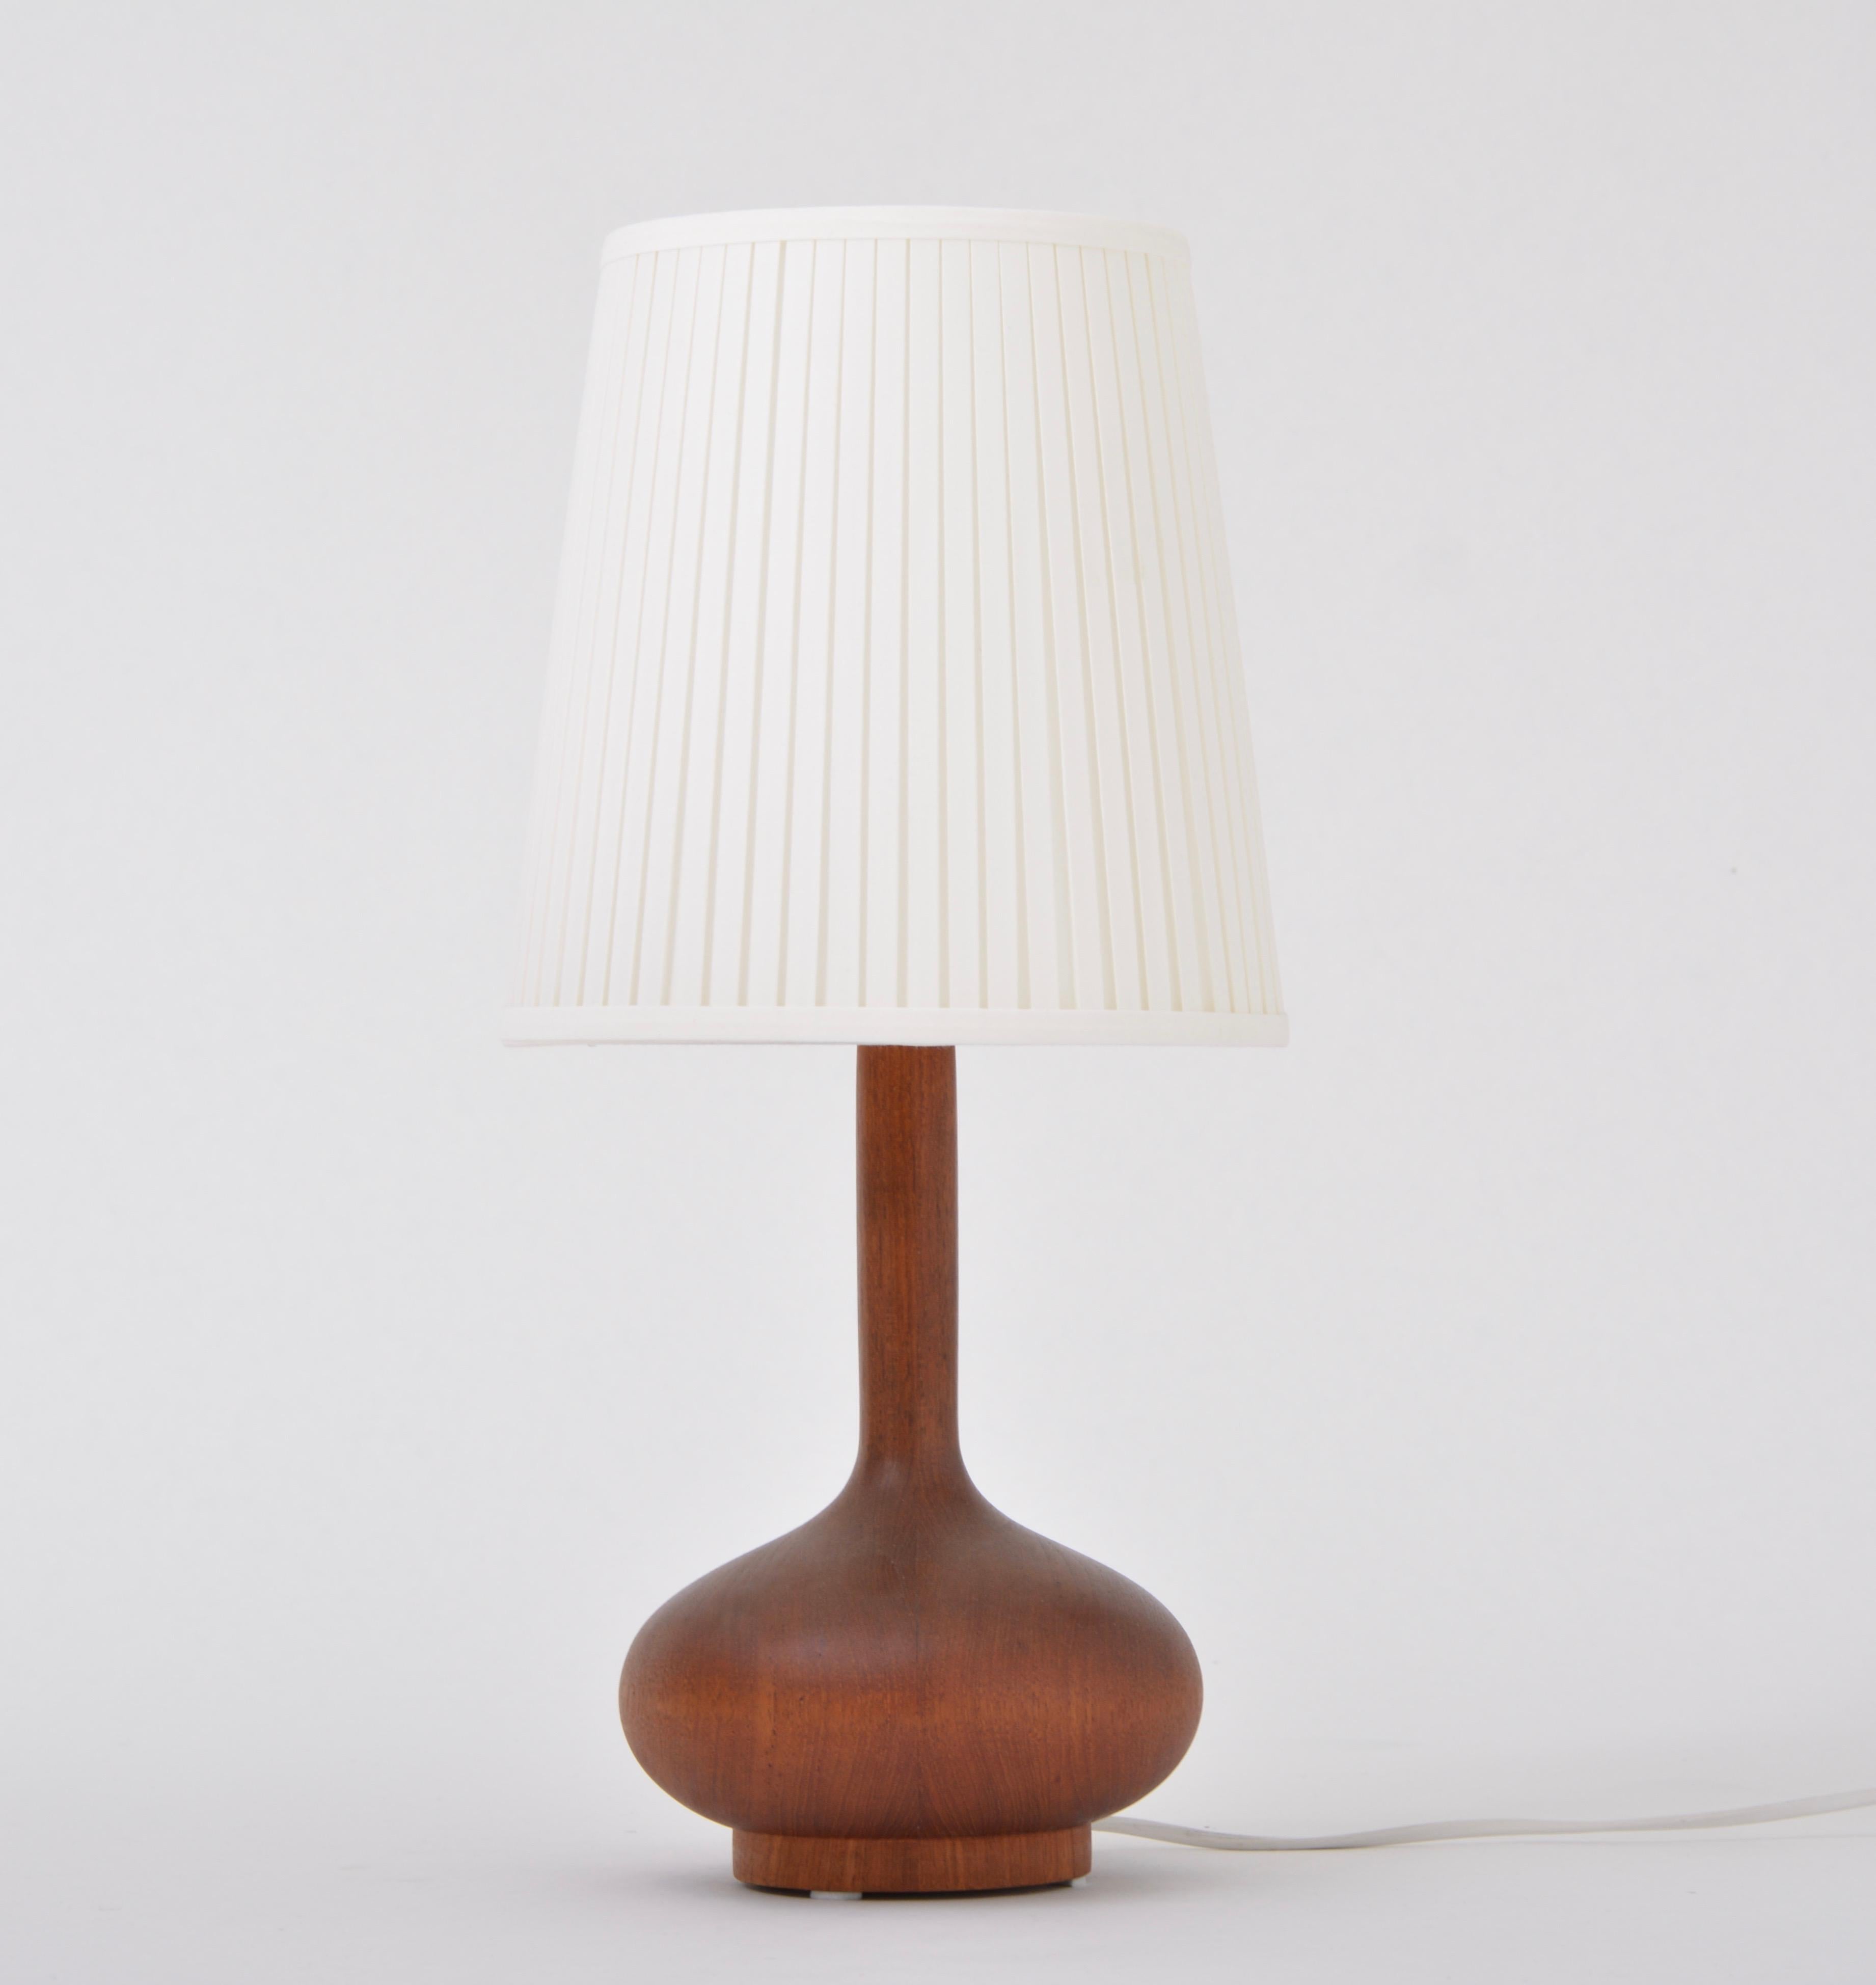 This table lamp was produced in the 1960s in Scandinavia, probably in Denmark. The base is made of teak wood. The lamp has been rewired with a switch and has a new socket and shade.